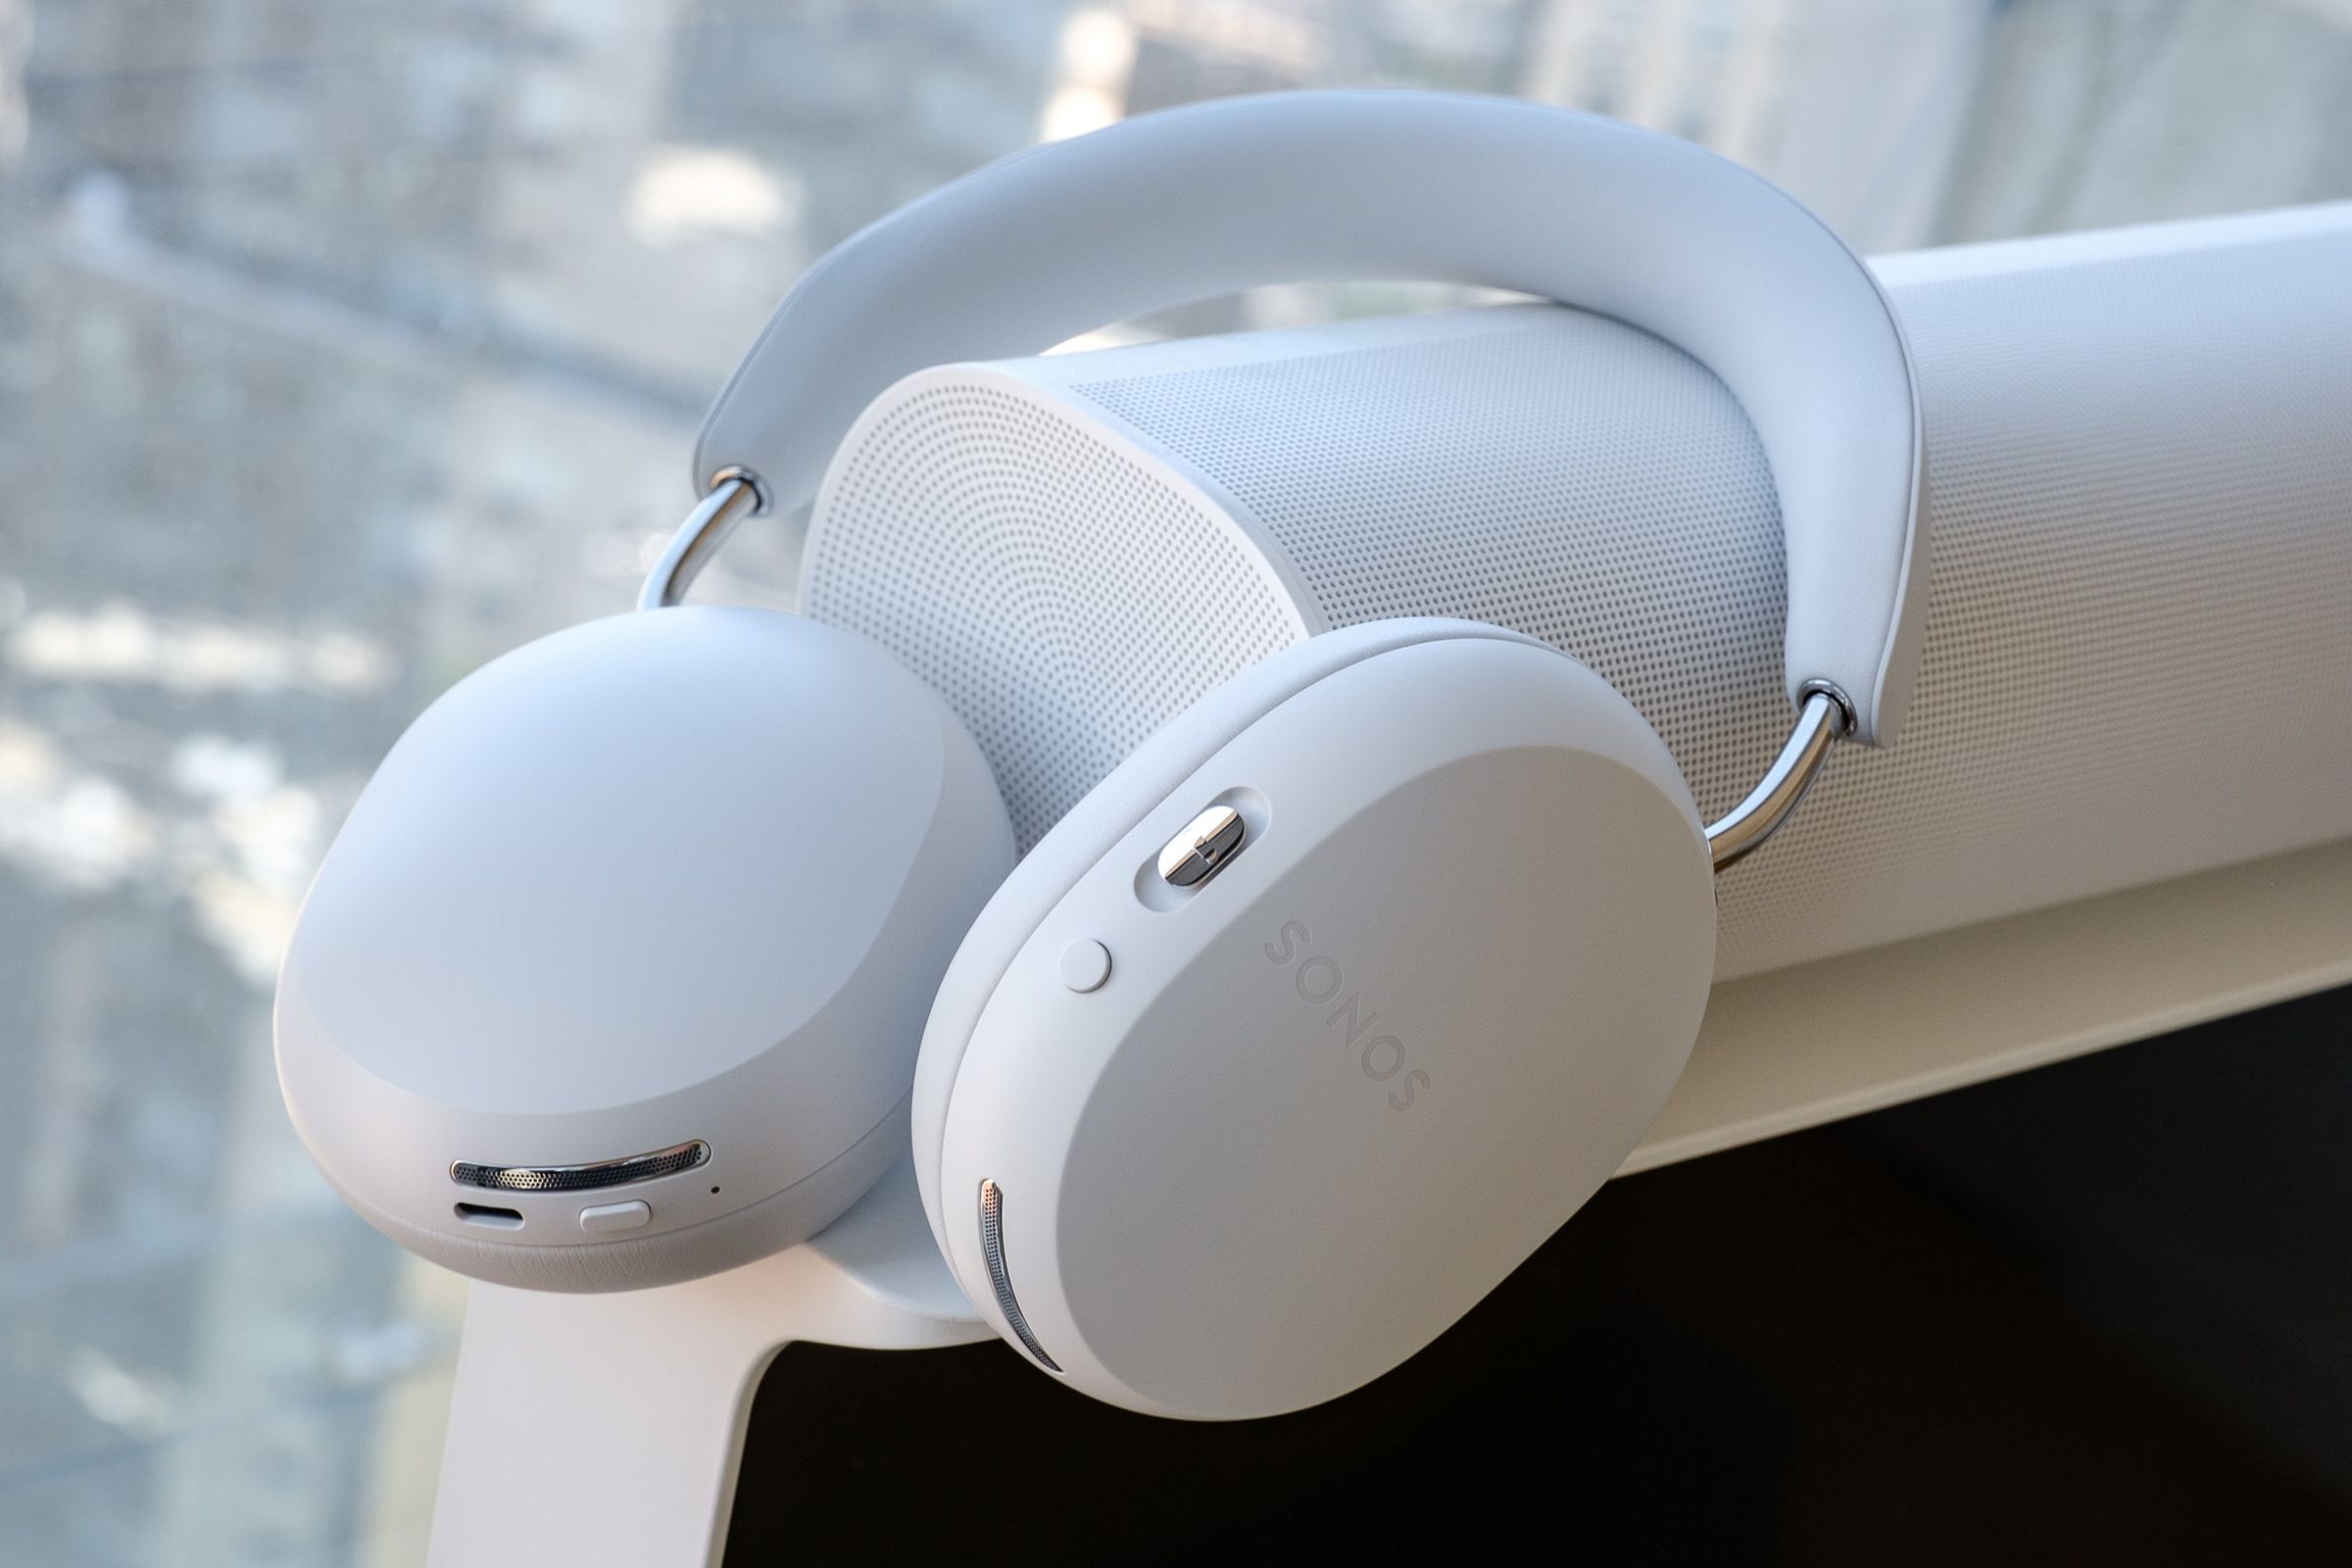 A photo of the Sonos Ace wireless headphones.